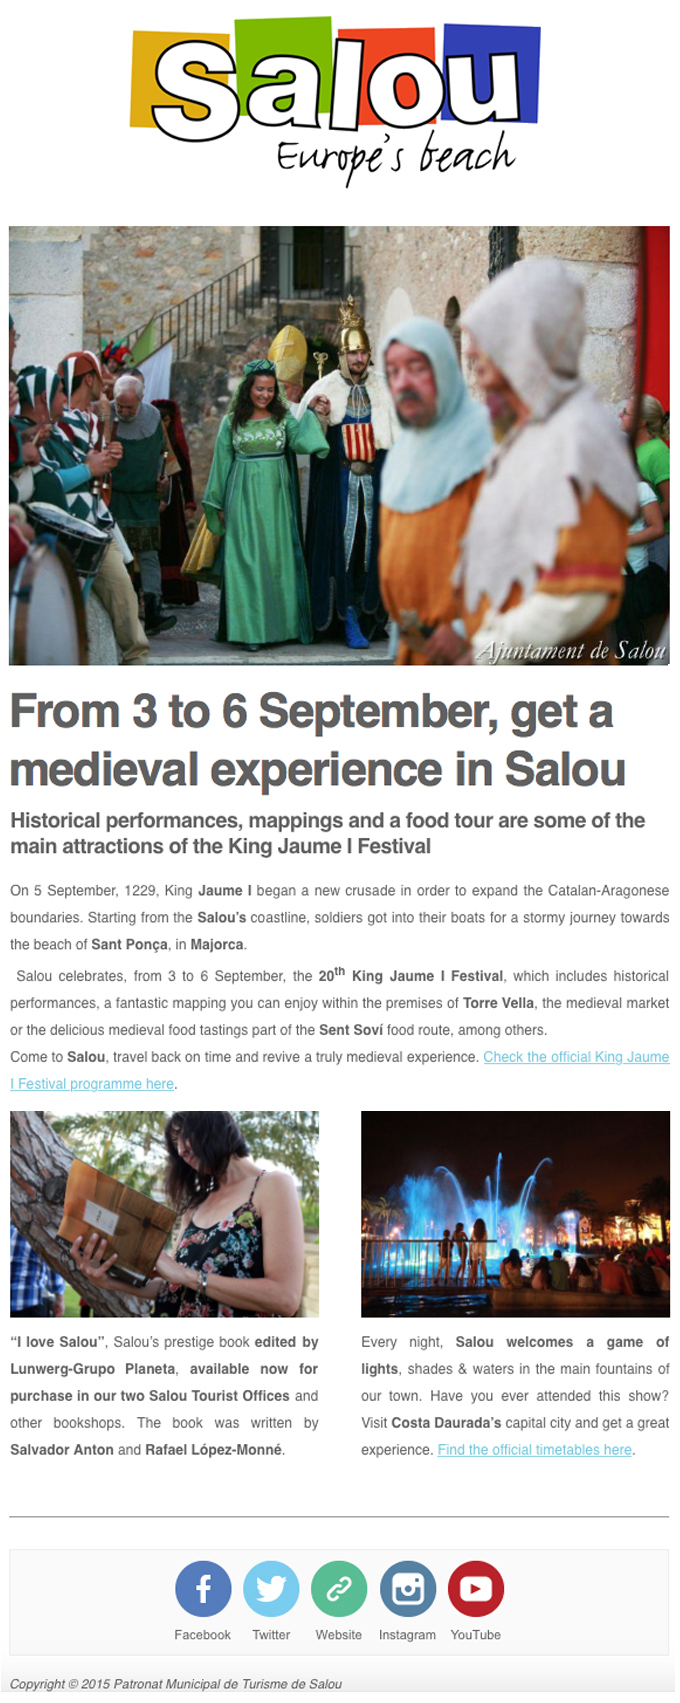 From 3 to 6 September, get a medieval experience in Salou